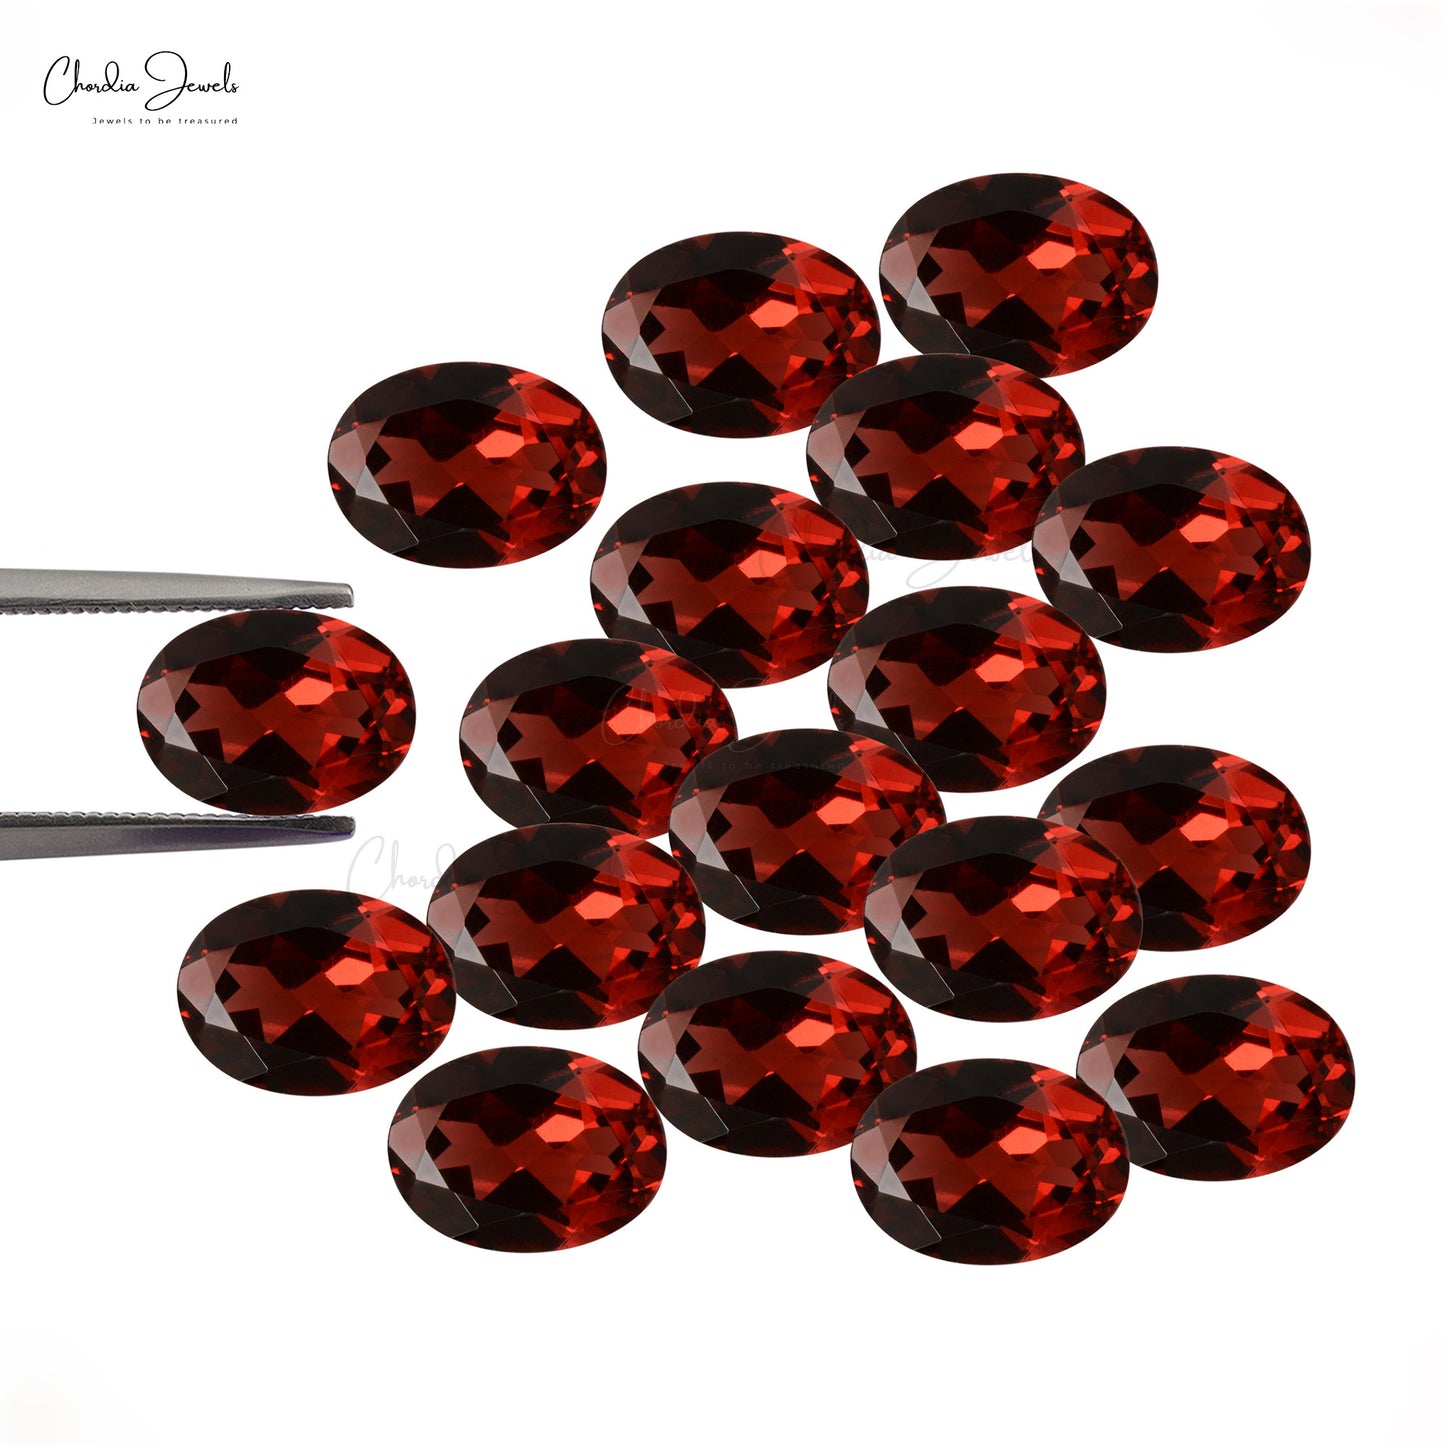 Load image into Gallery viewer, 5x4 mm Super Flawless Red Garnet Oval Cut Loose Gemstone for Sale, 1 Piece
